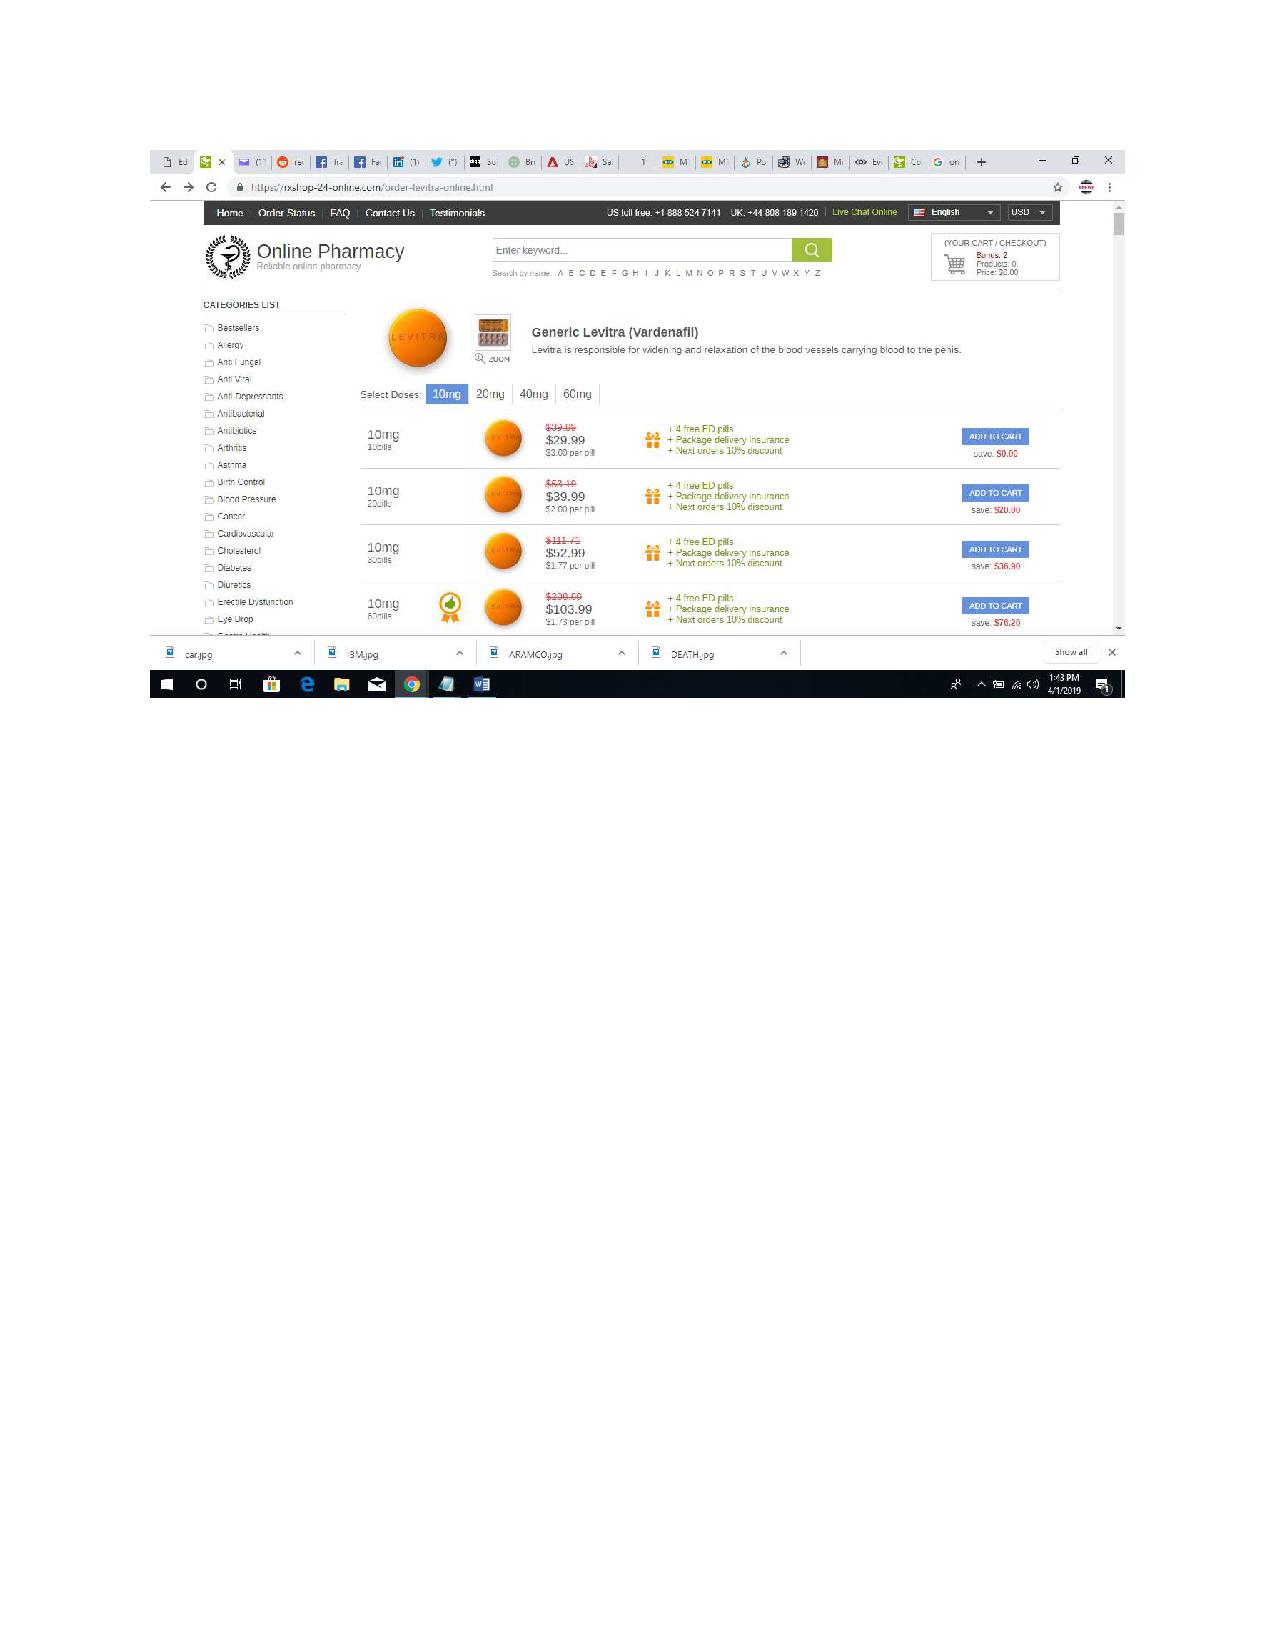 SCREENSHOT OF THE COMPANY'S SITE, ONLINE PHARMACY 